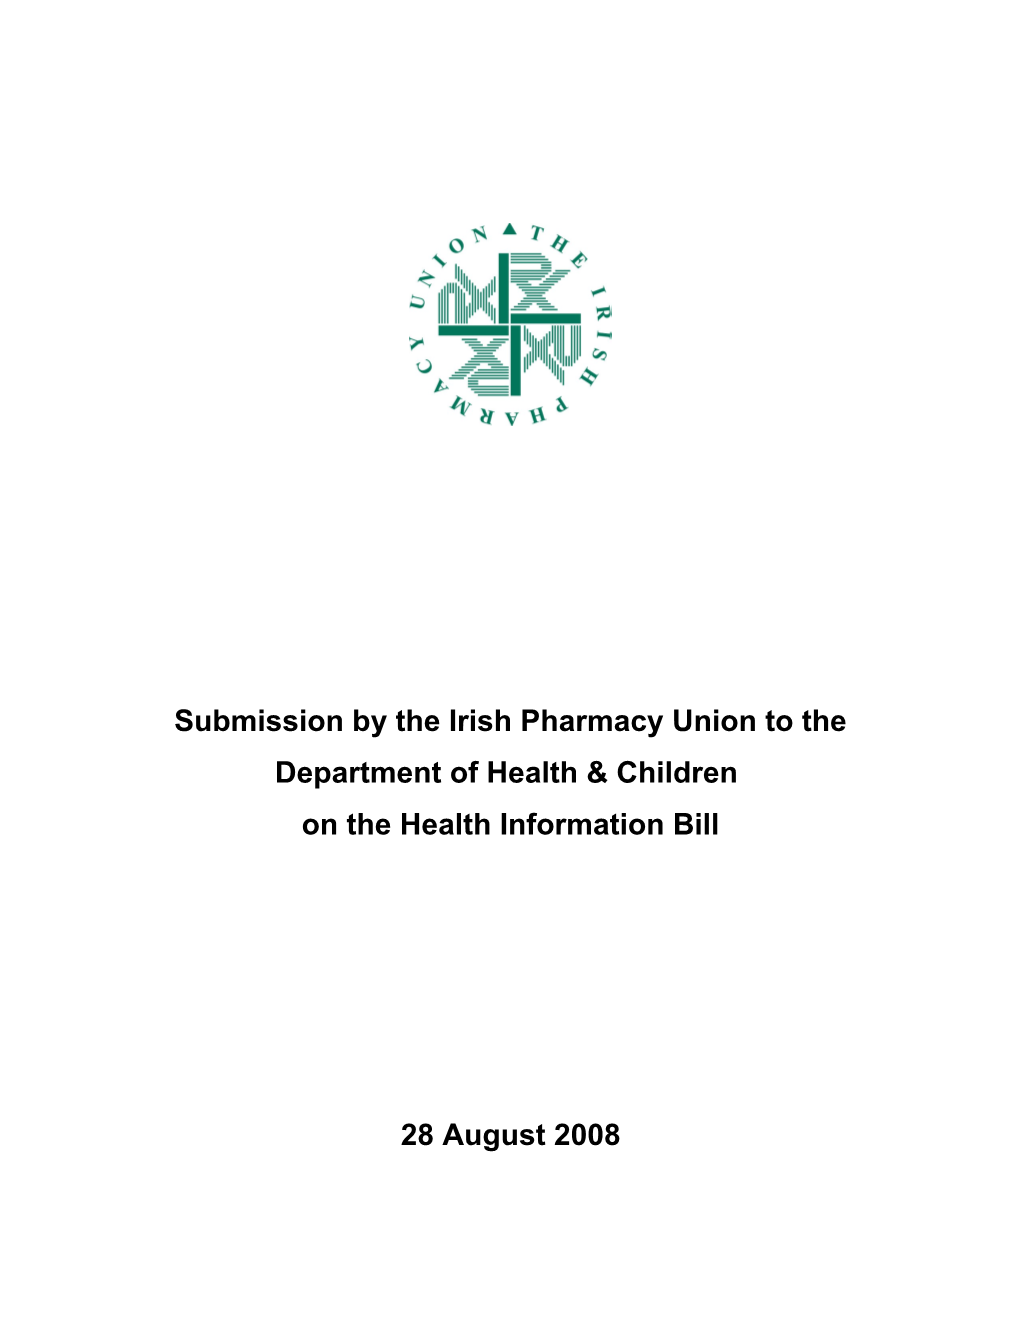 Submission by the Irish Pharmacy Union to The